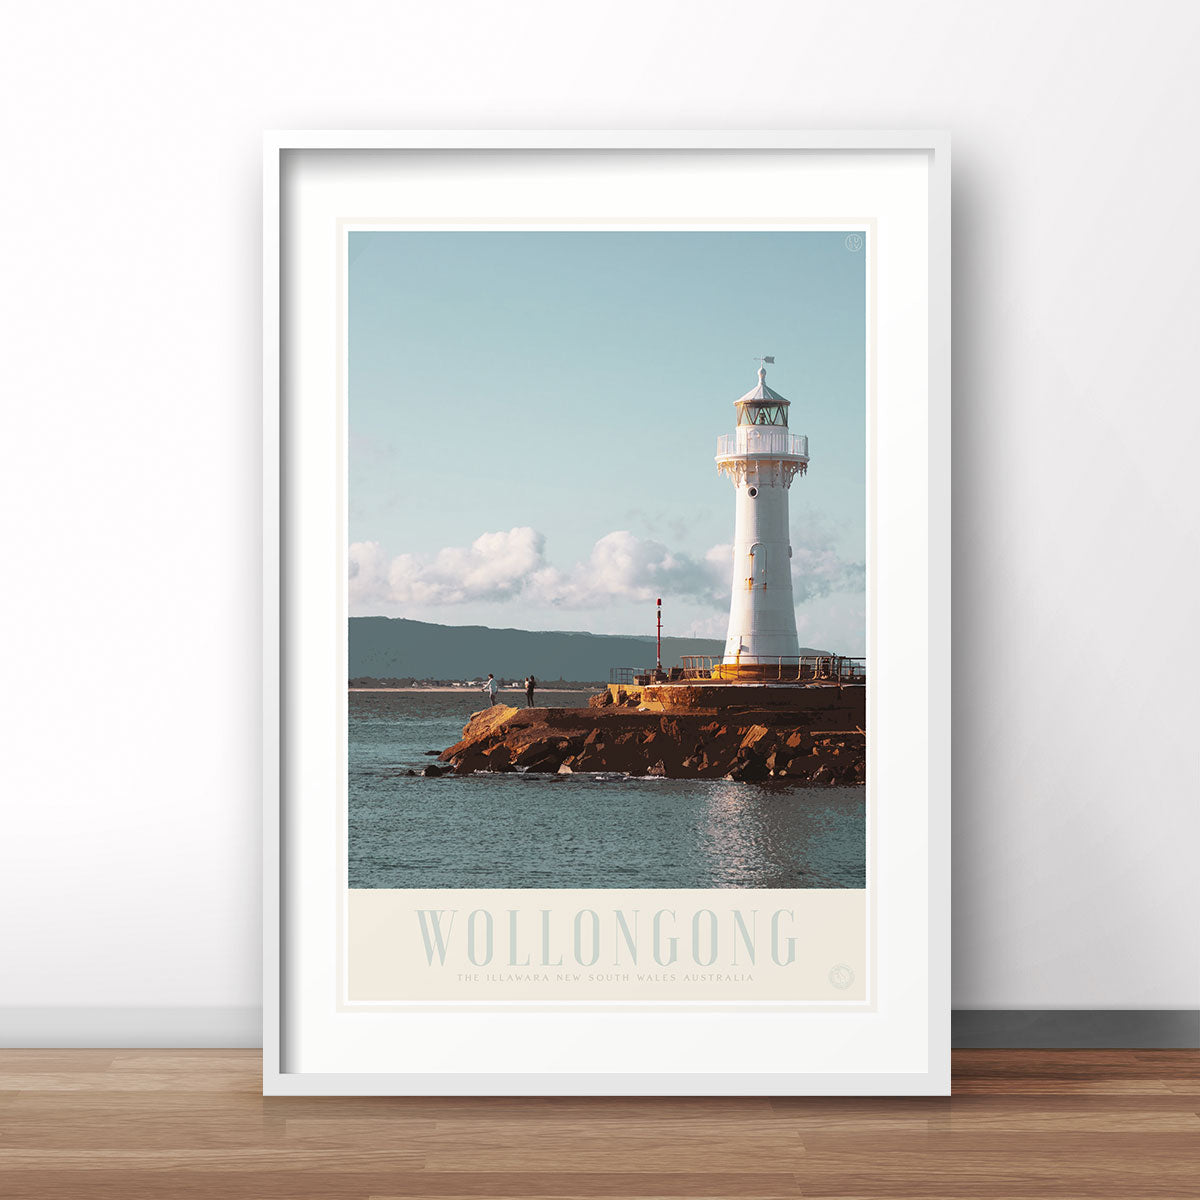 Wollongong NSW vintage retro travel poster print by Places We Luv